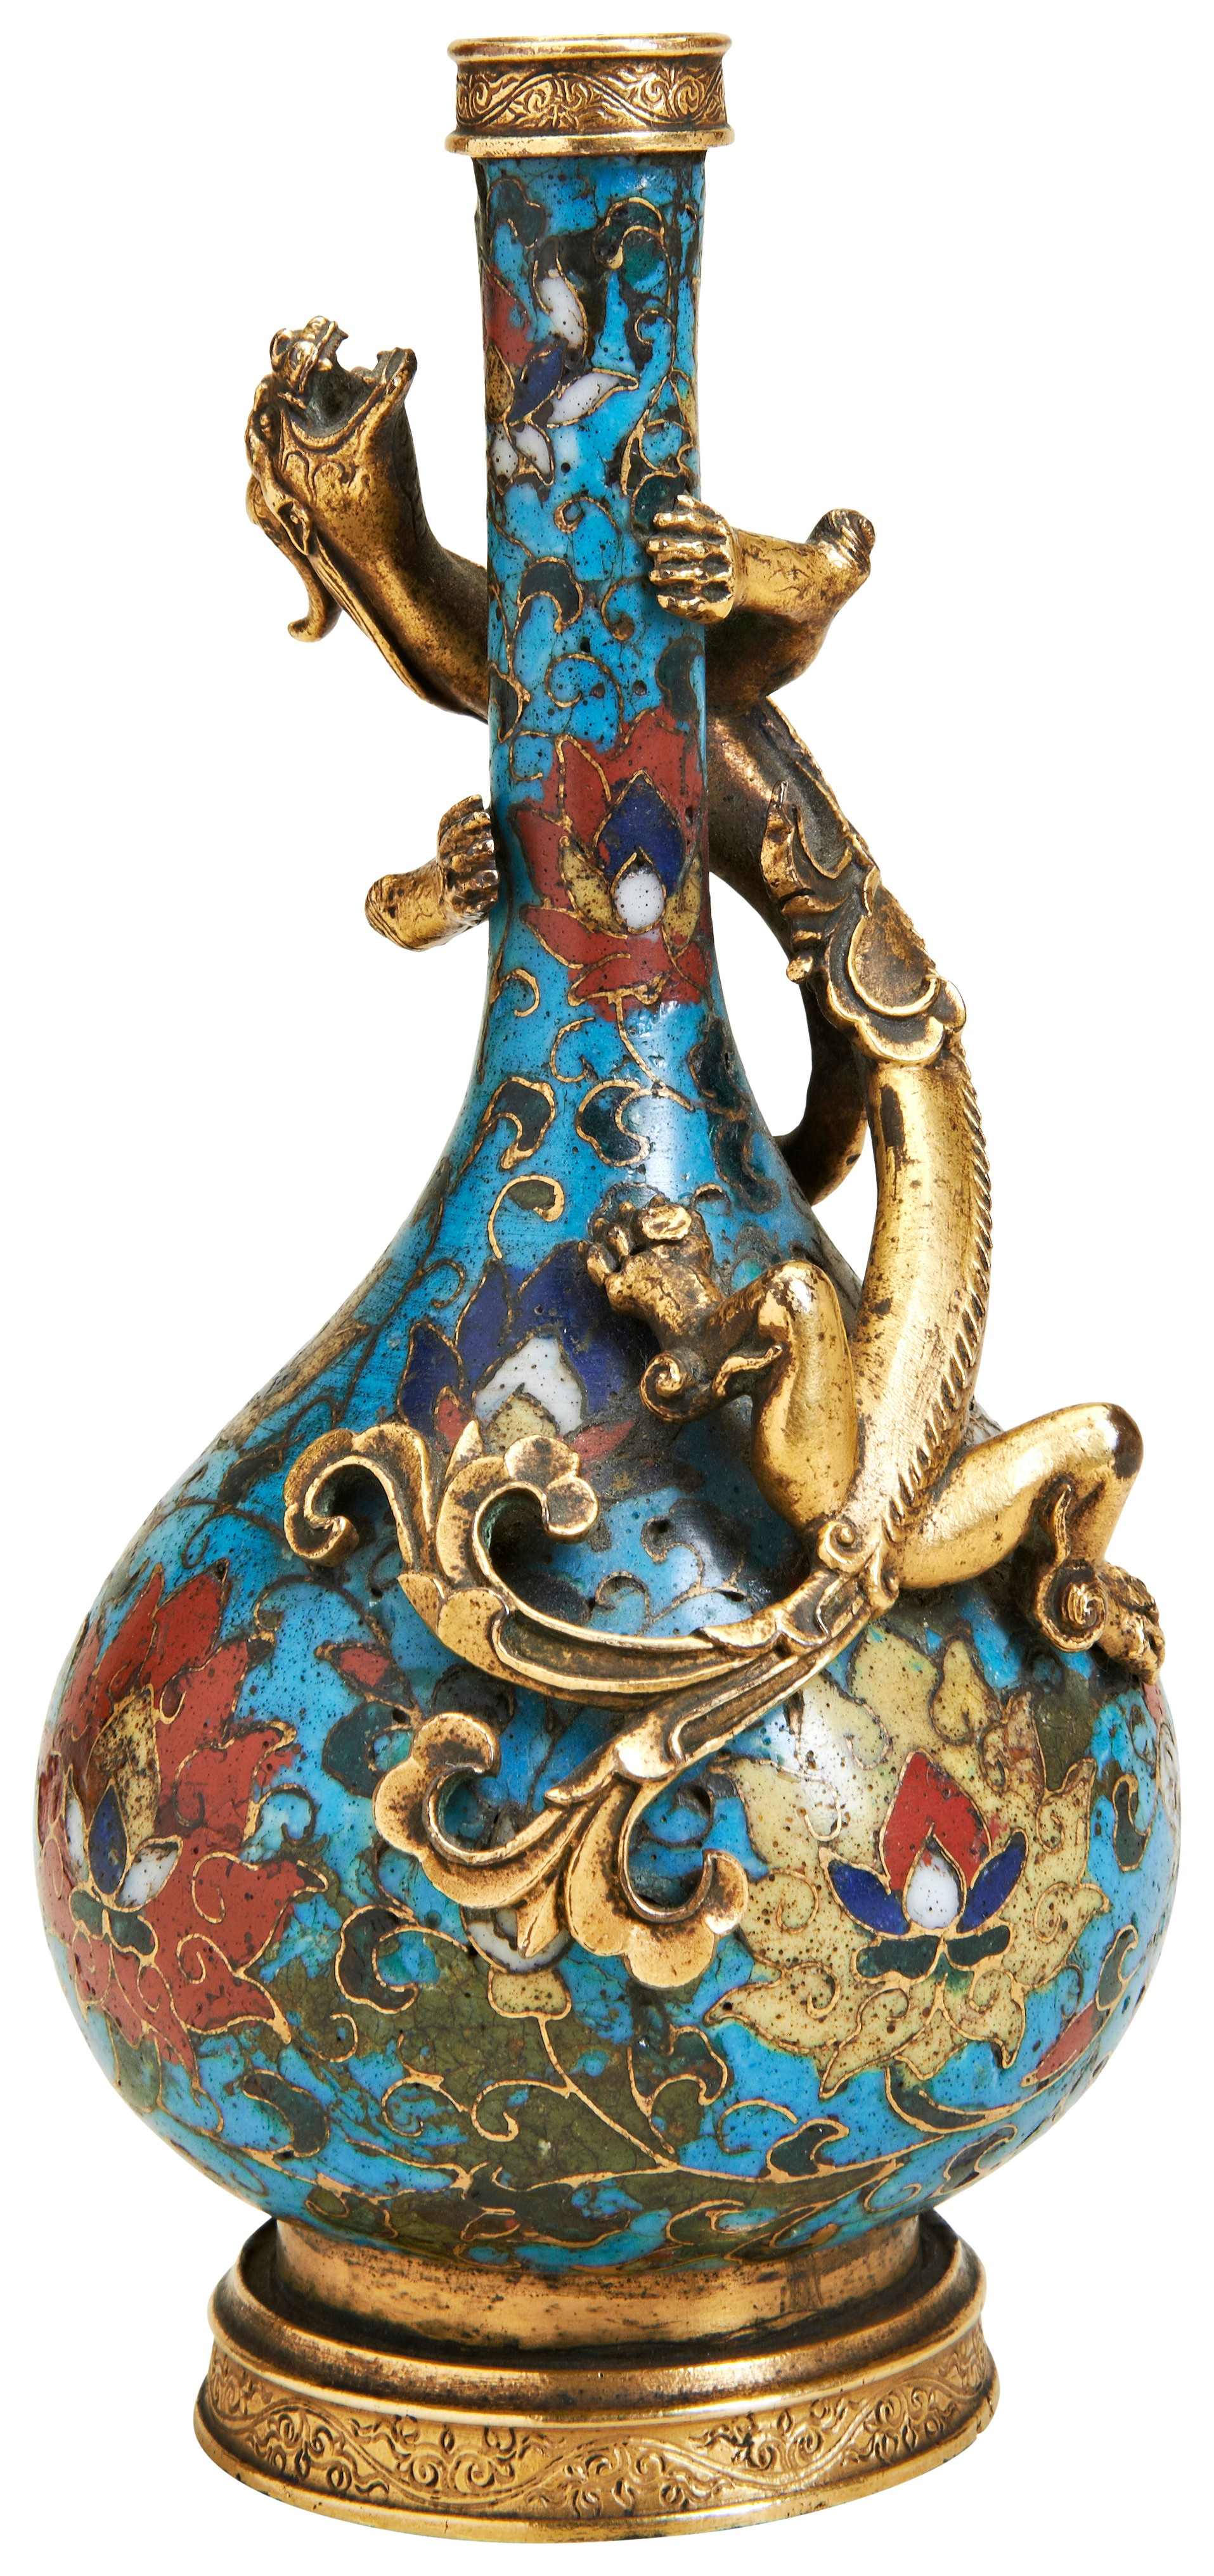 A FINE AND RARE CLOISONNE ENAMEL 'LOTUS' BOTTLE VASE INCISED JINGTAI SIX CHARACTER MARK, MID MING - Image 6 of 6